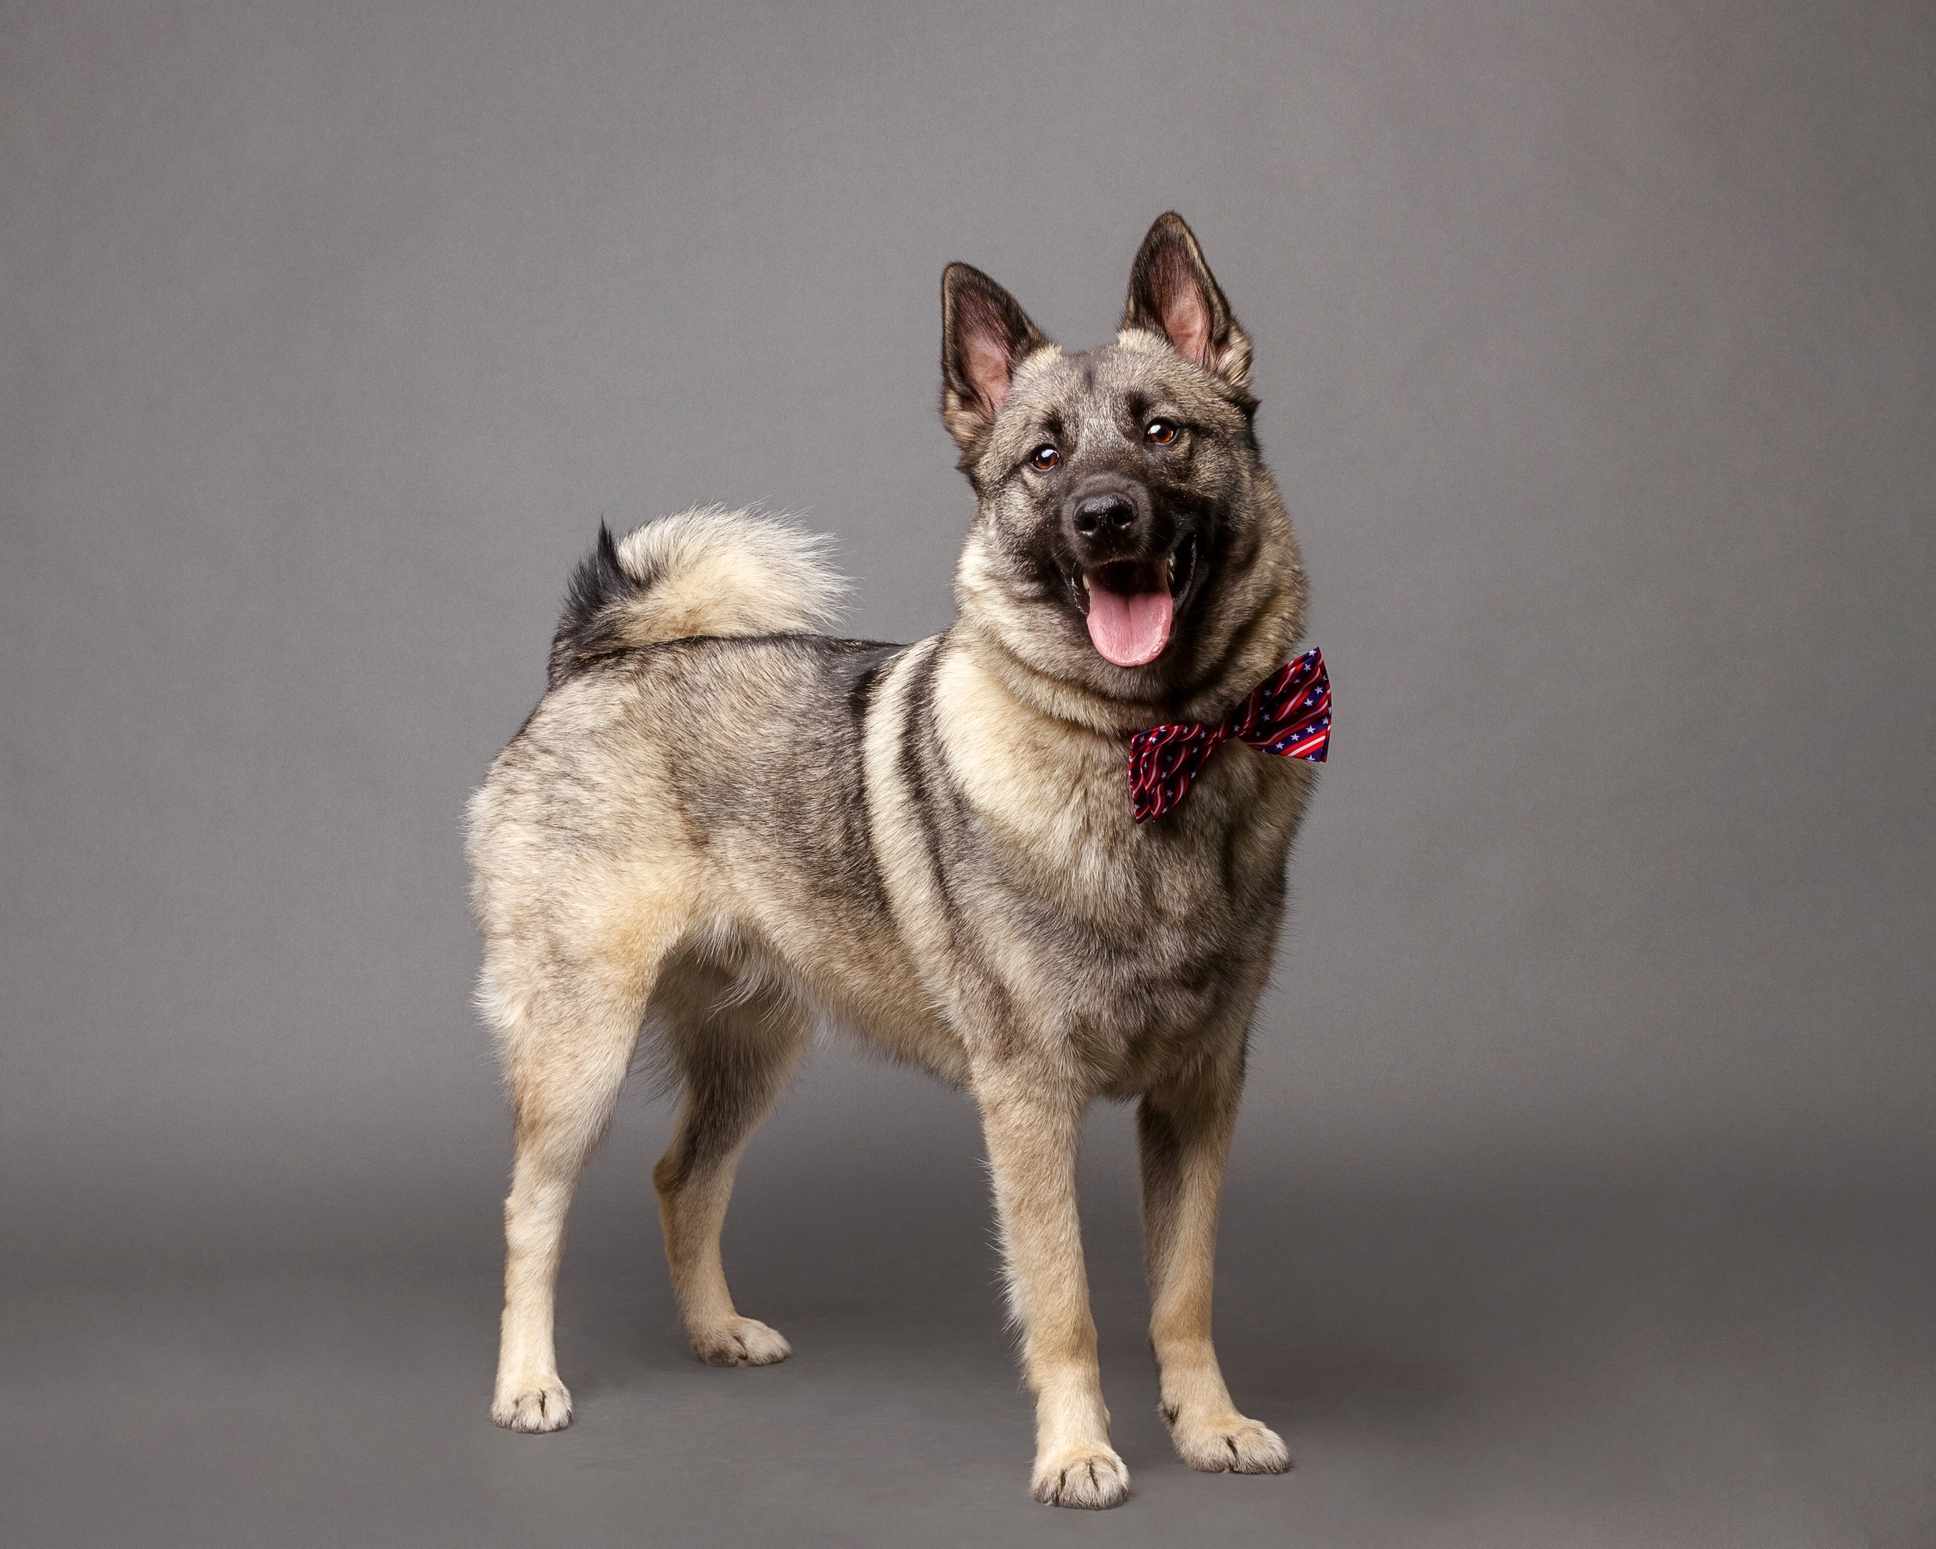 Norwegian Elkhound standing with a bowtie on in front of a grey background